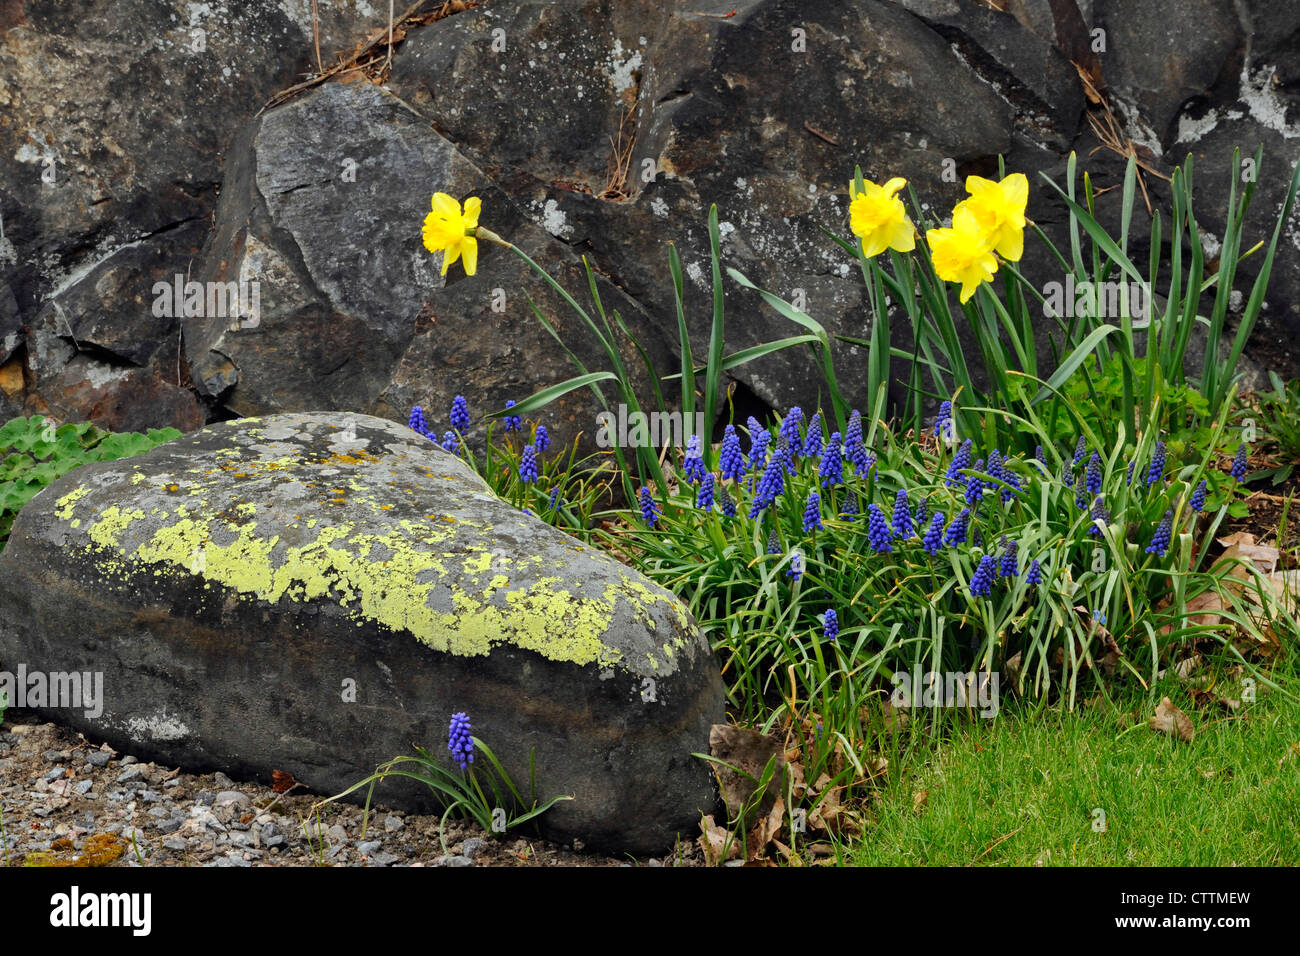 Daffodils Narcissus And Grape Hyacinth Muscari Spp And Cvs